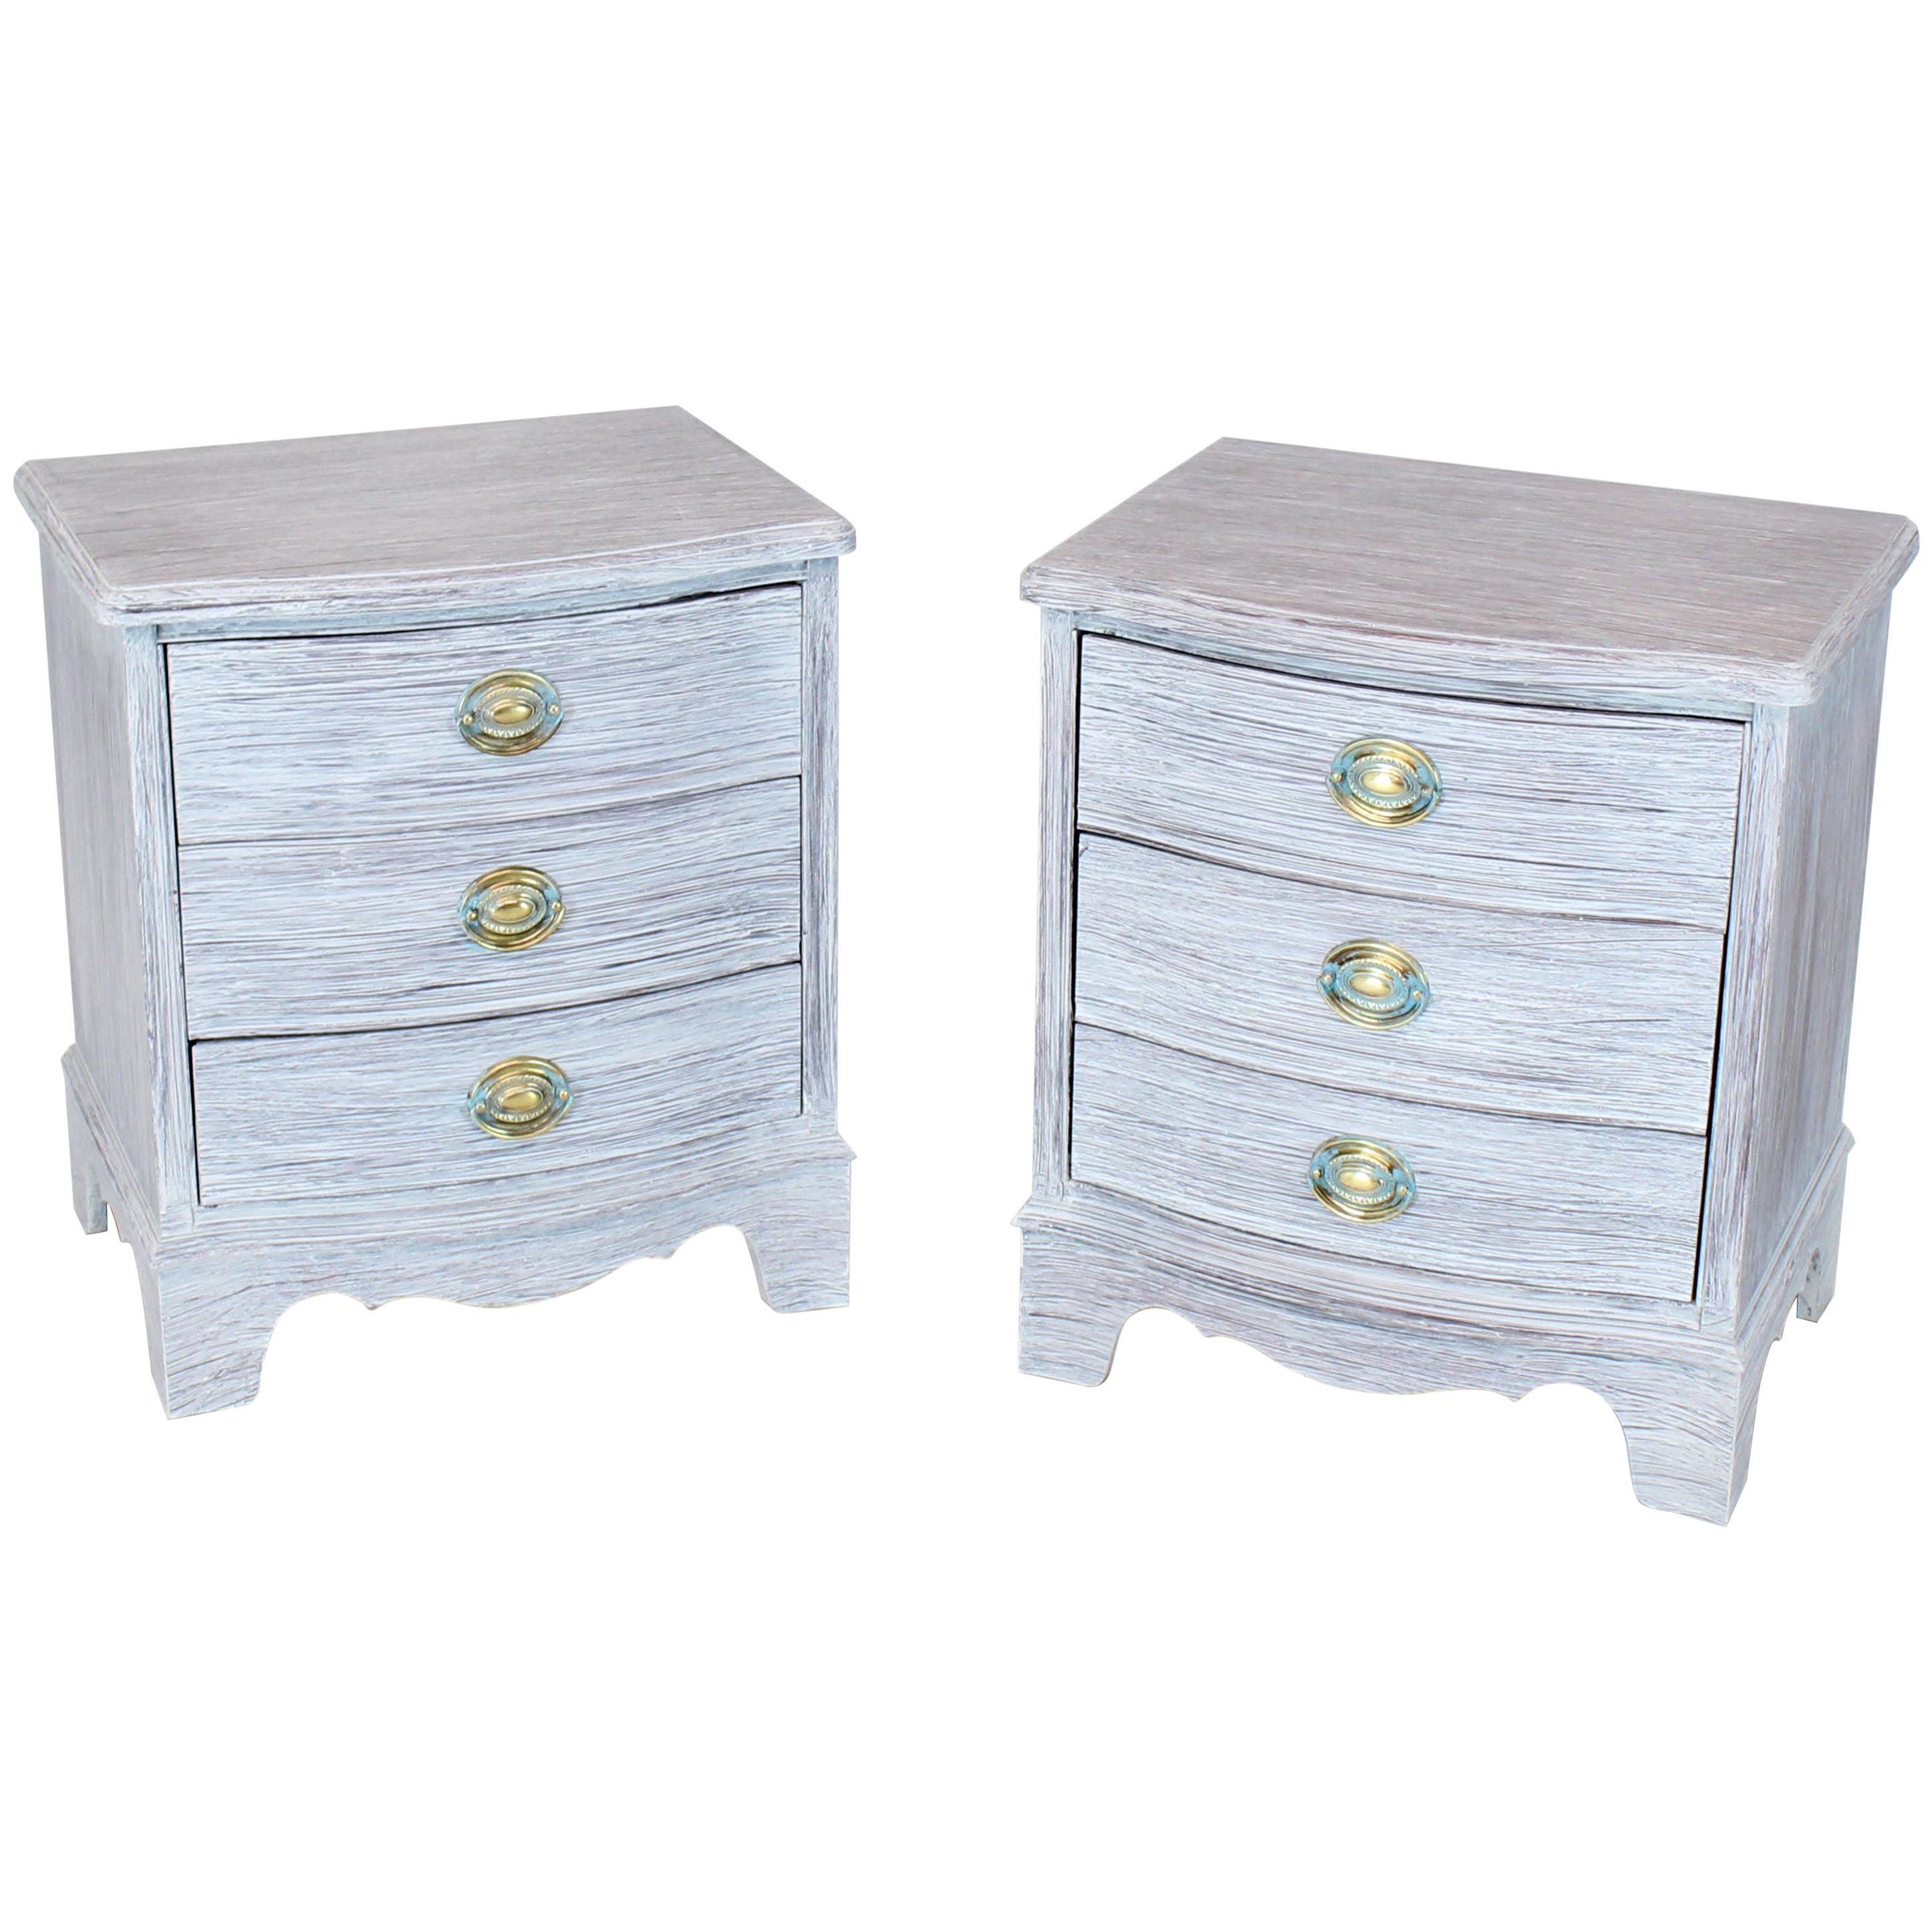 Pair of Chabby Chic White Painted Three Drawers Nightstands Lamp Tables